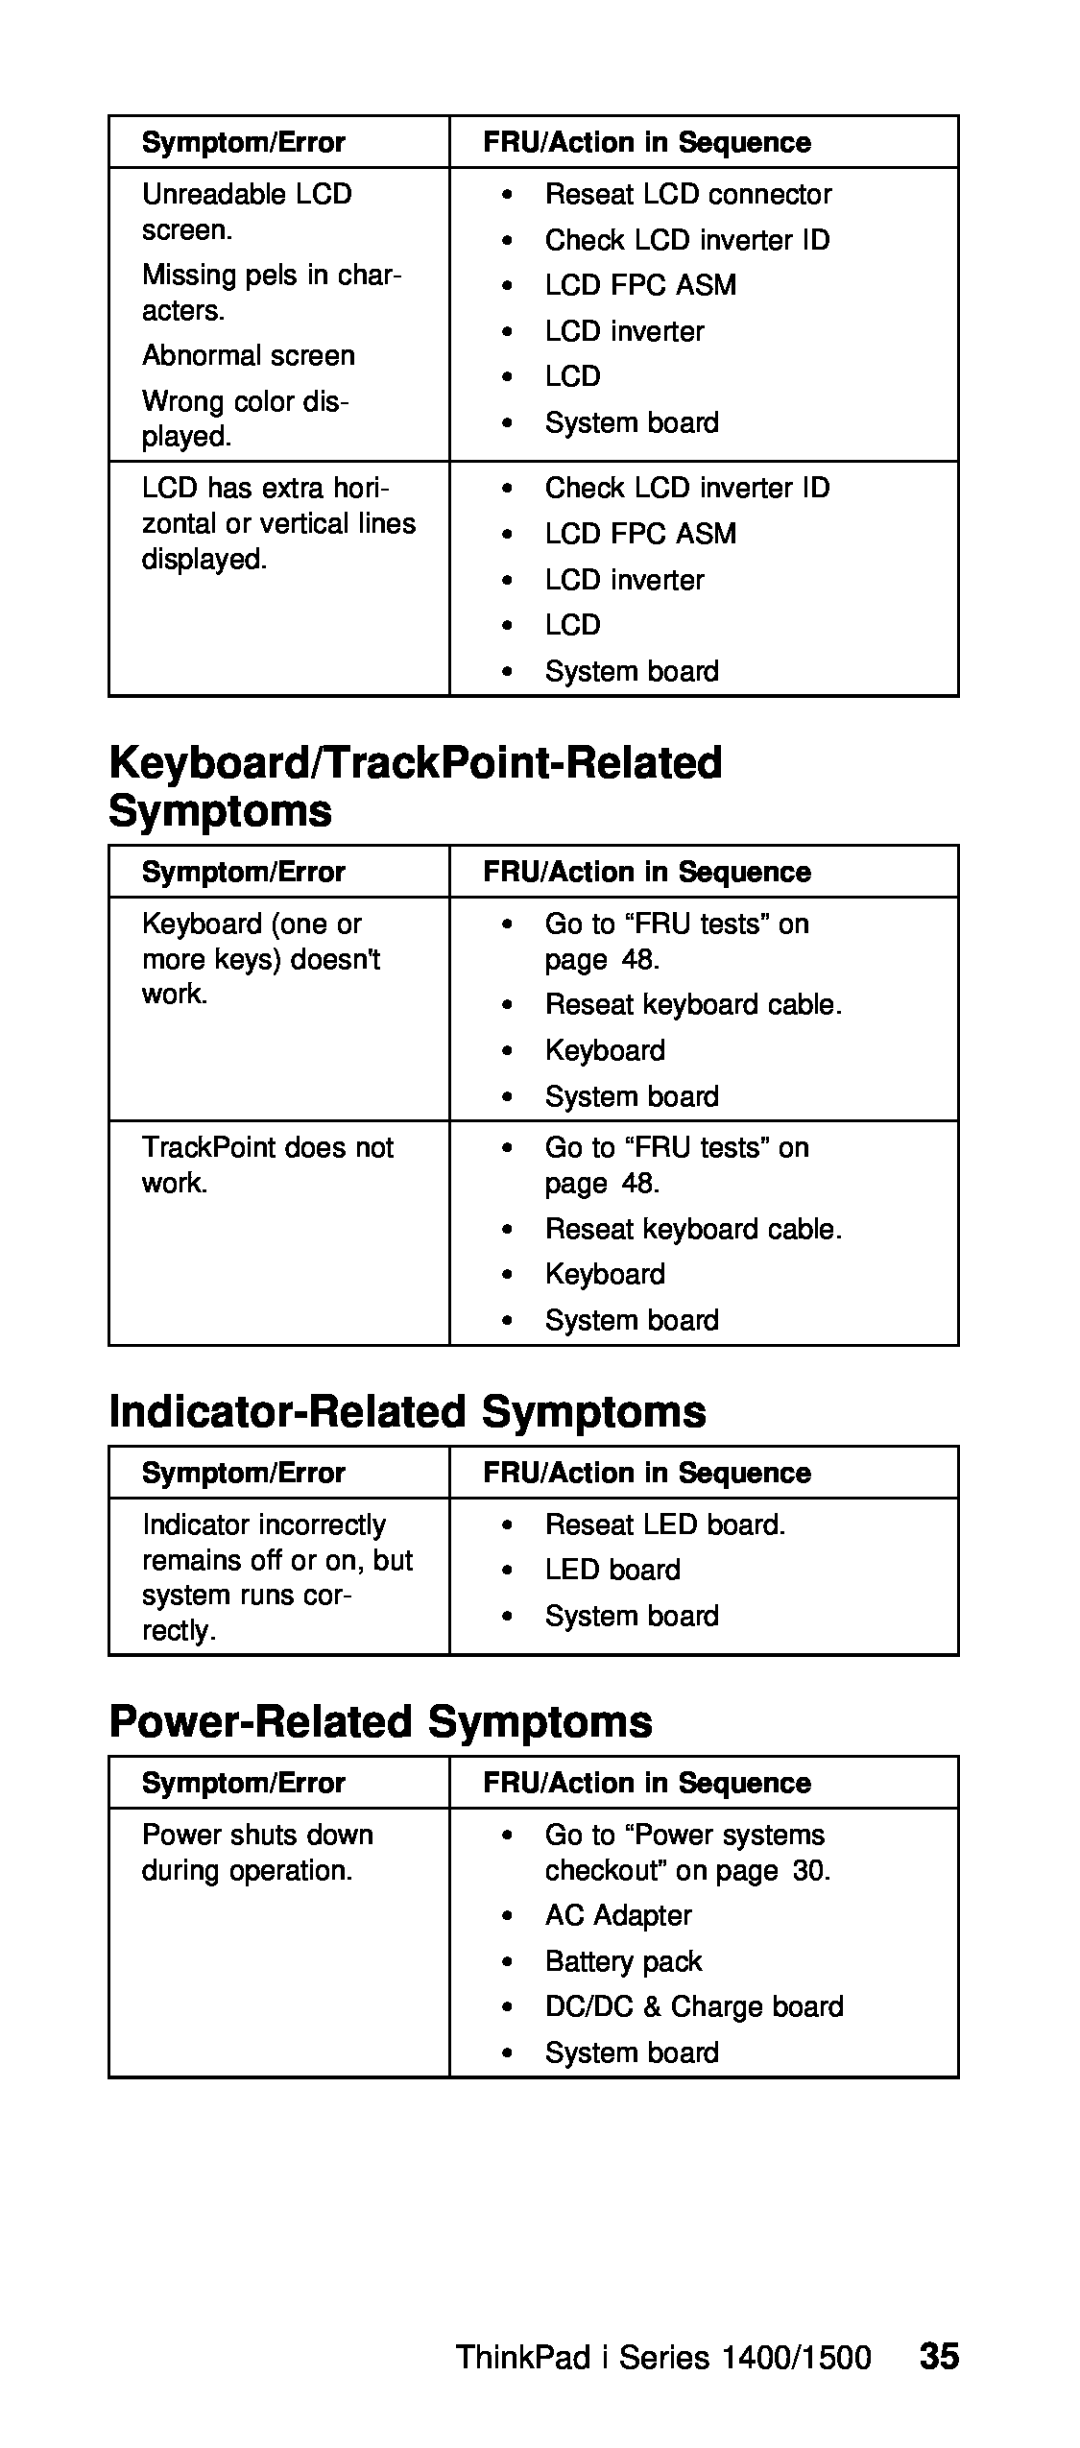 IBM Series 1400 manual Keyboard/TrackPoint-Related Symptoms, Indicator-Related Symptoms, Power-Related Symptoms, Sequence 